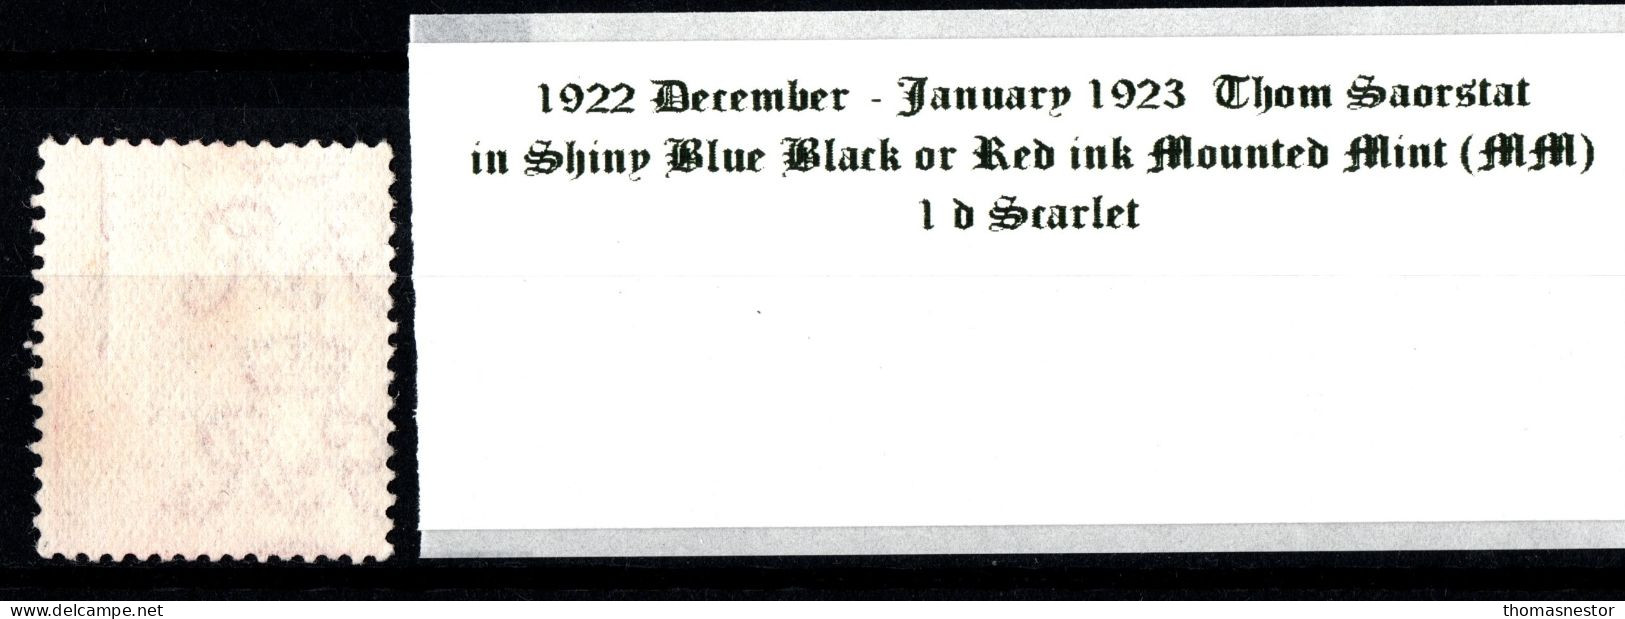 1922 - 1923 December - January Thom Saorstát In Shiny Blue Black Or Red Ink 1 D Scarlet Mounted Mint (MM) - Nuovi